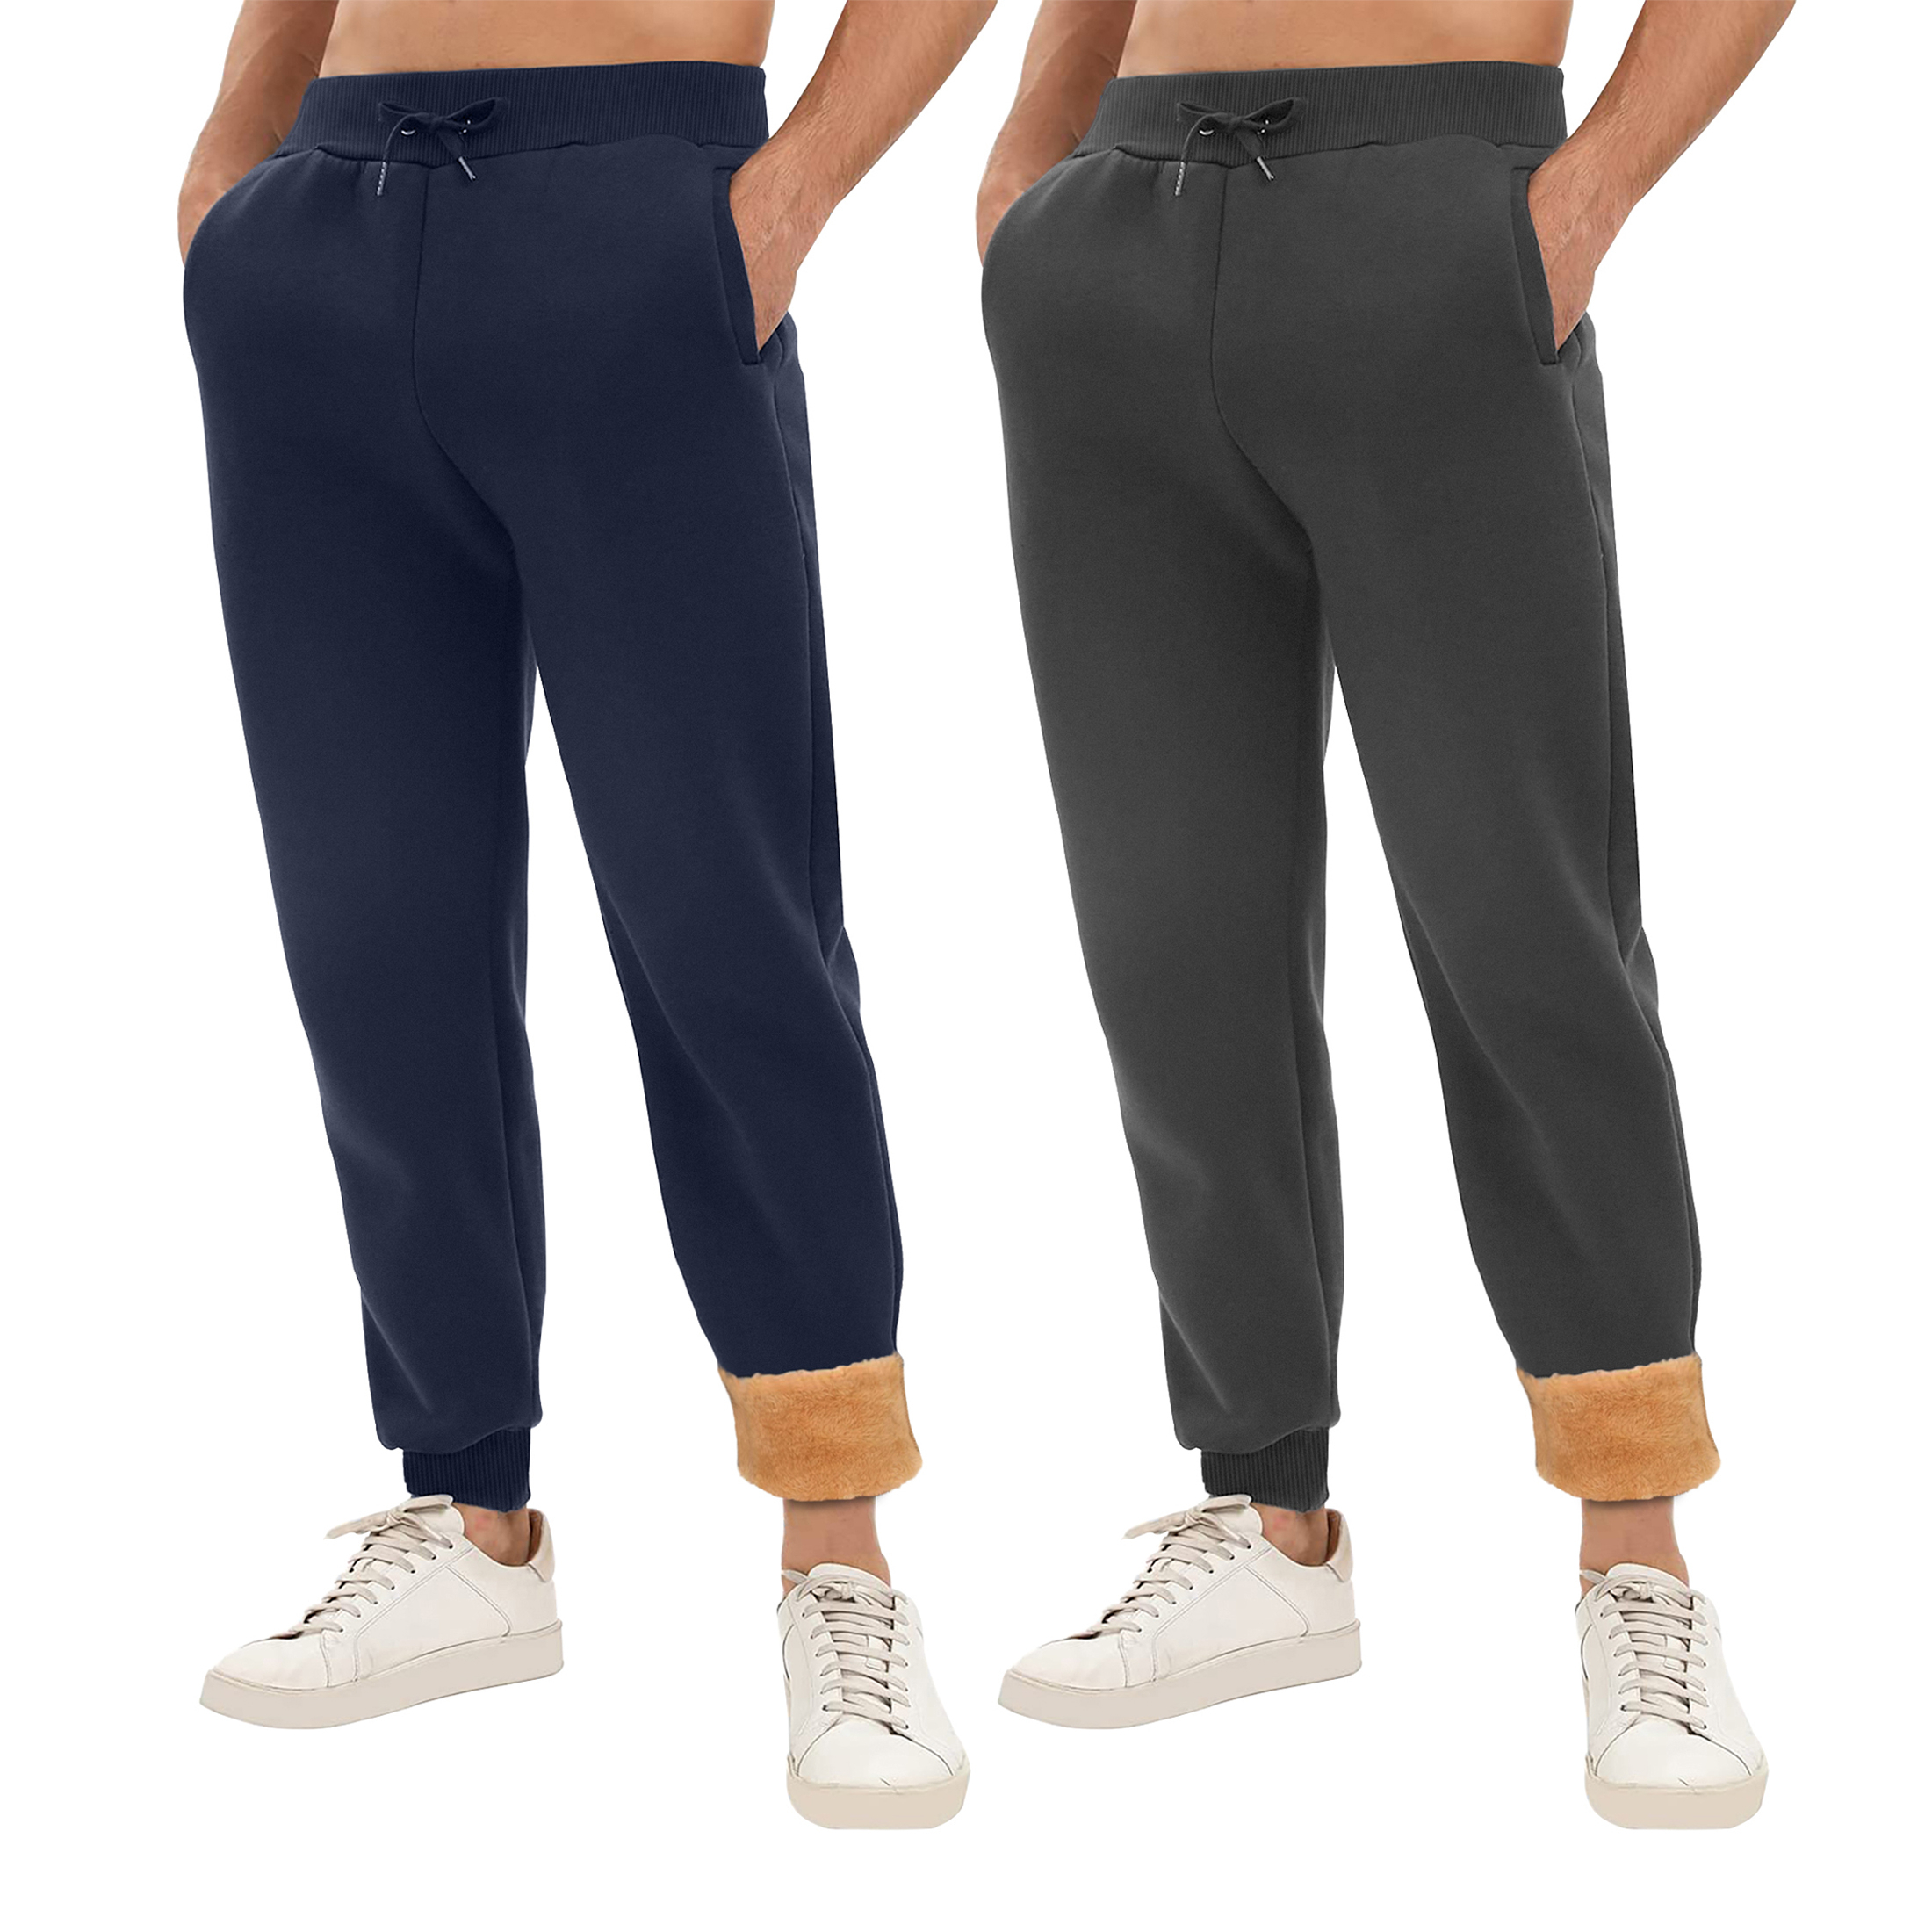 2-Pack: Men's Winter Warm Thick Sherpa Lined Jogger Track Pants With Pockets - Navy & Charcoal, Small